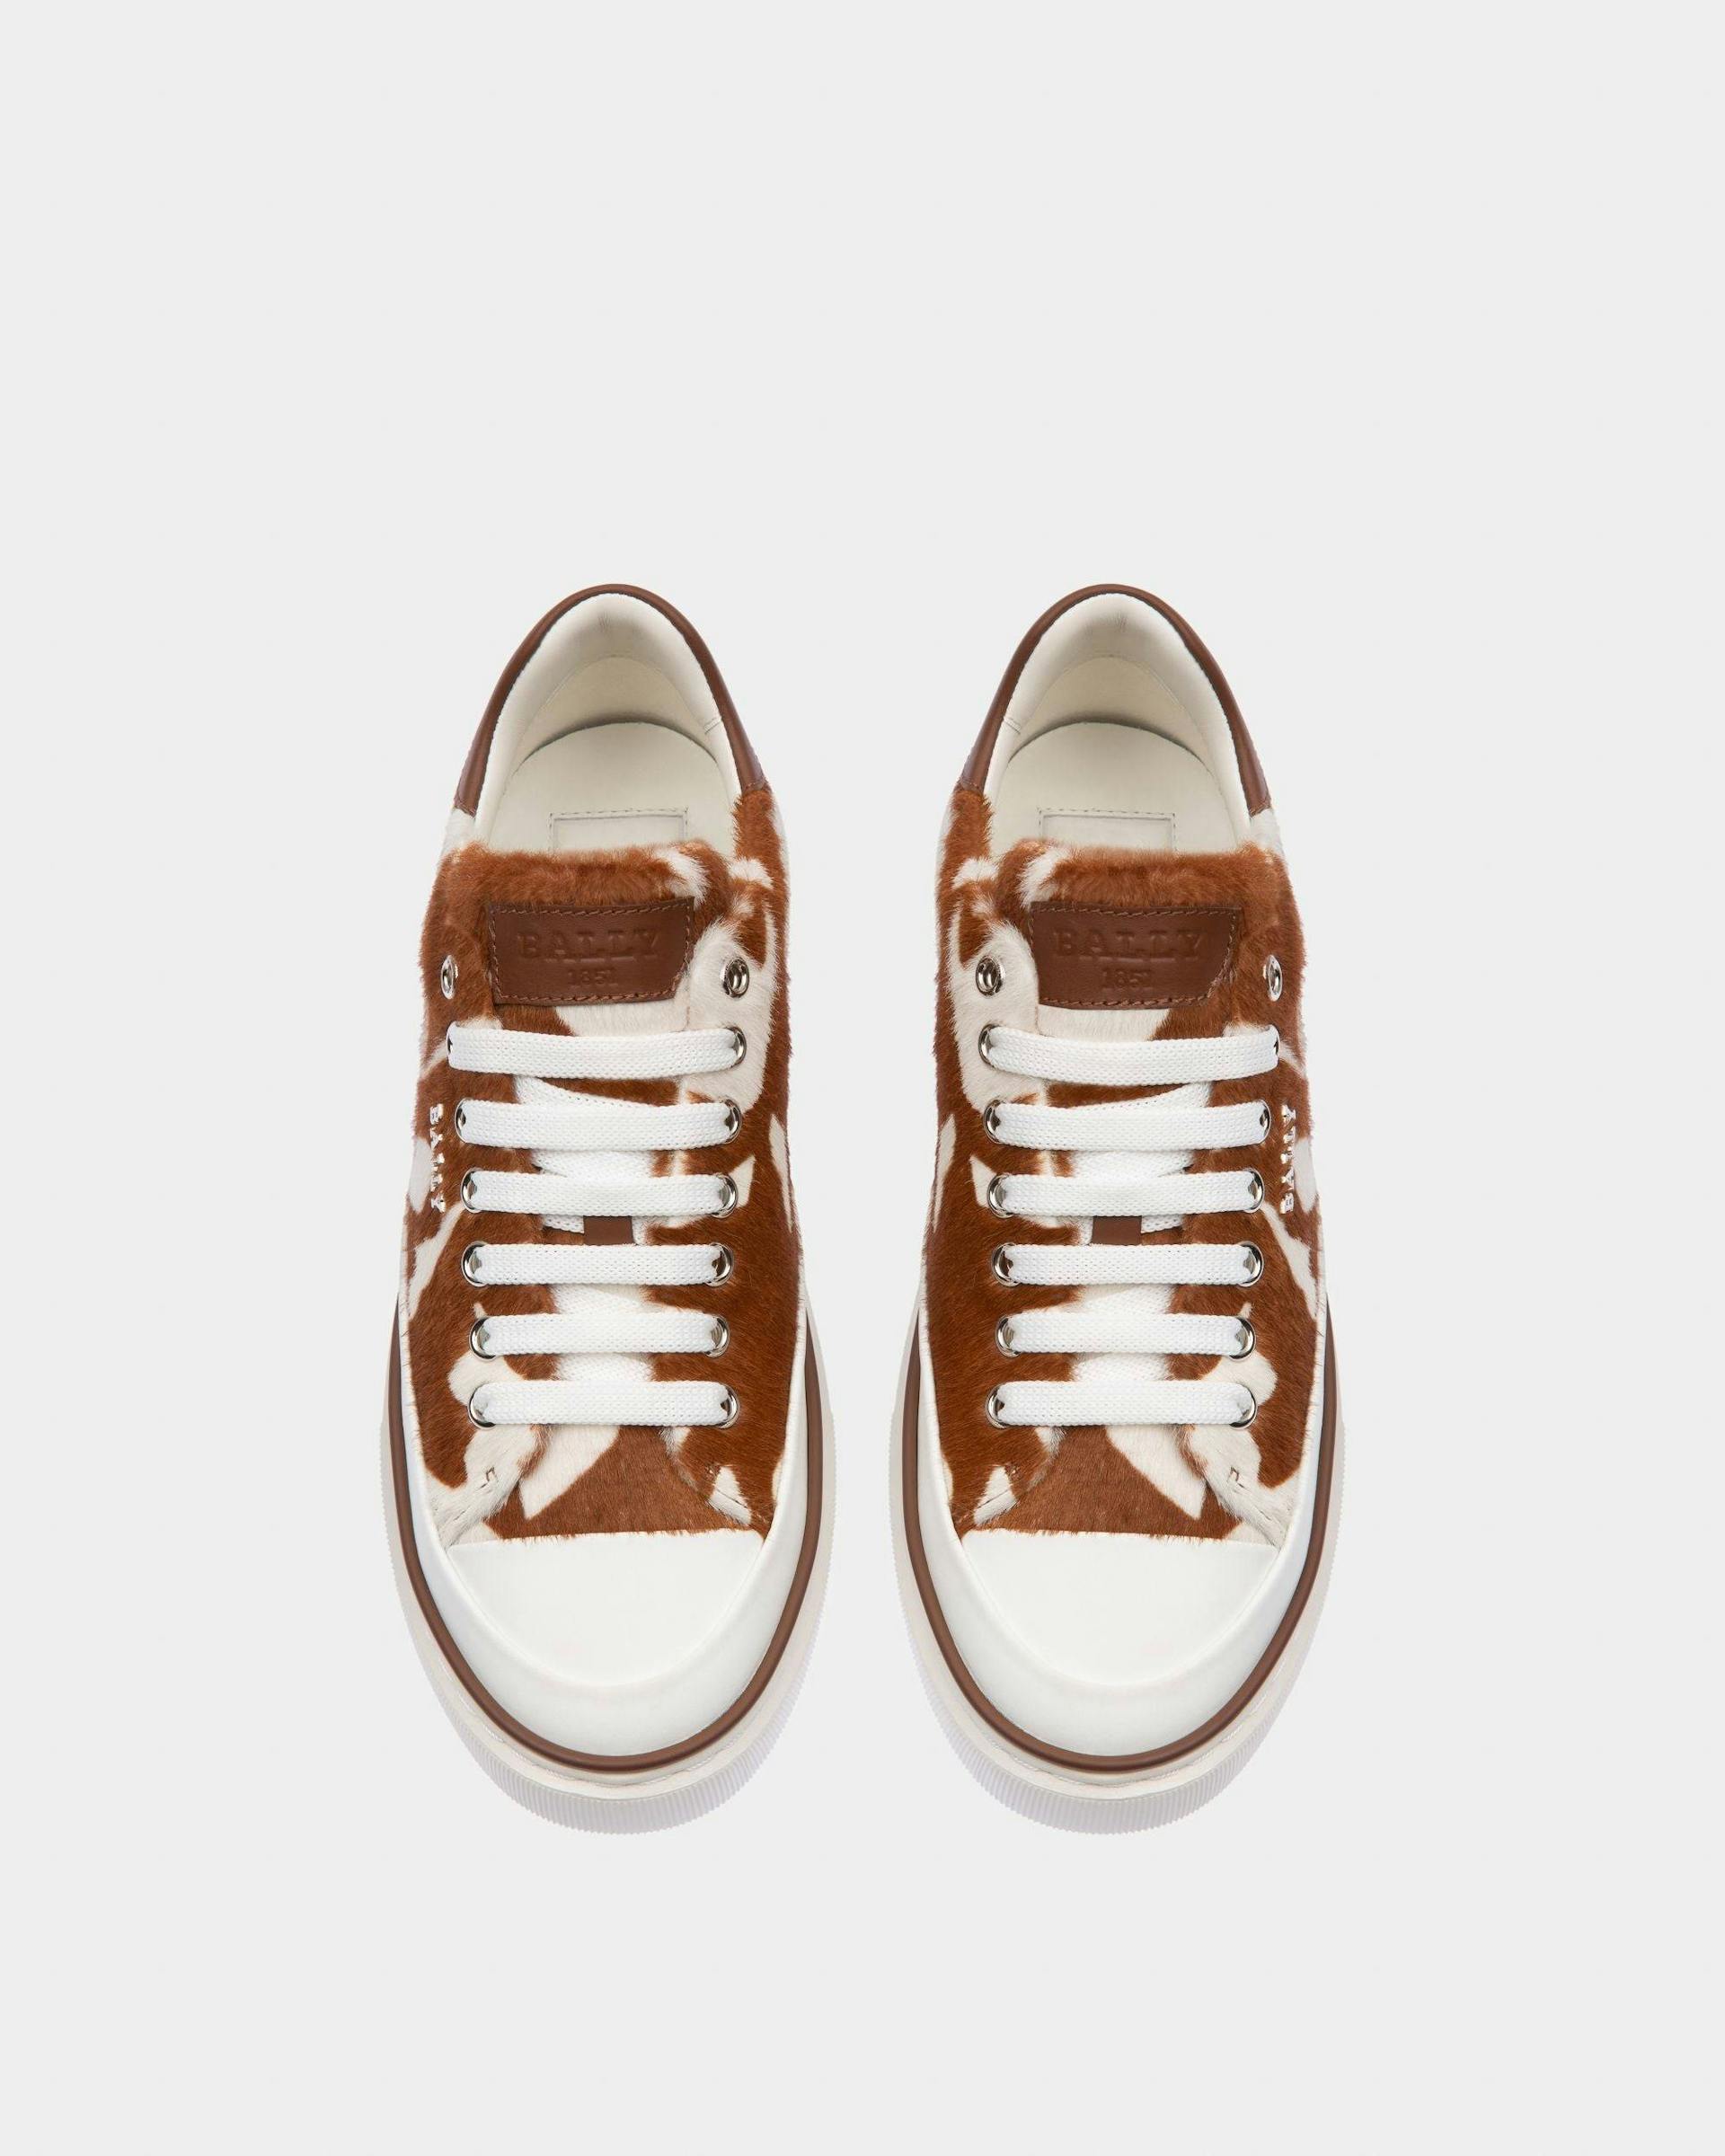 Maily Leather Sneakers In White & Brown - Women's - Bally - 02